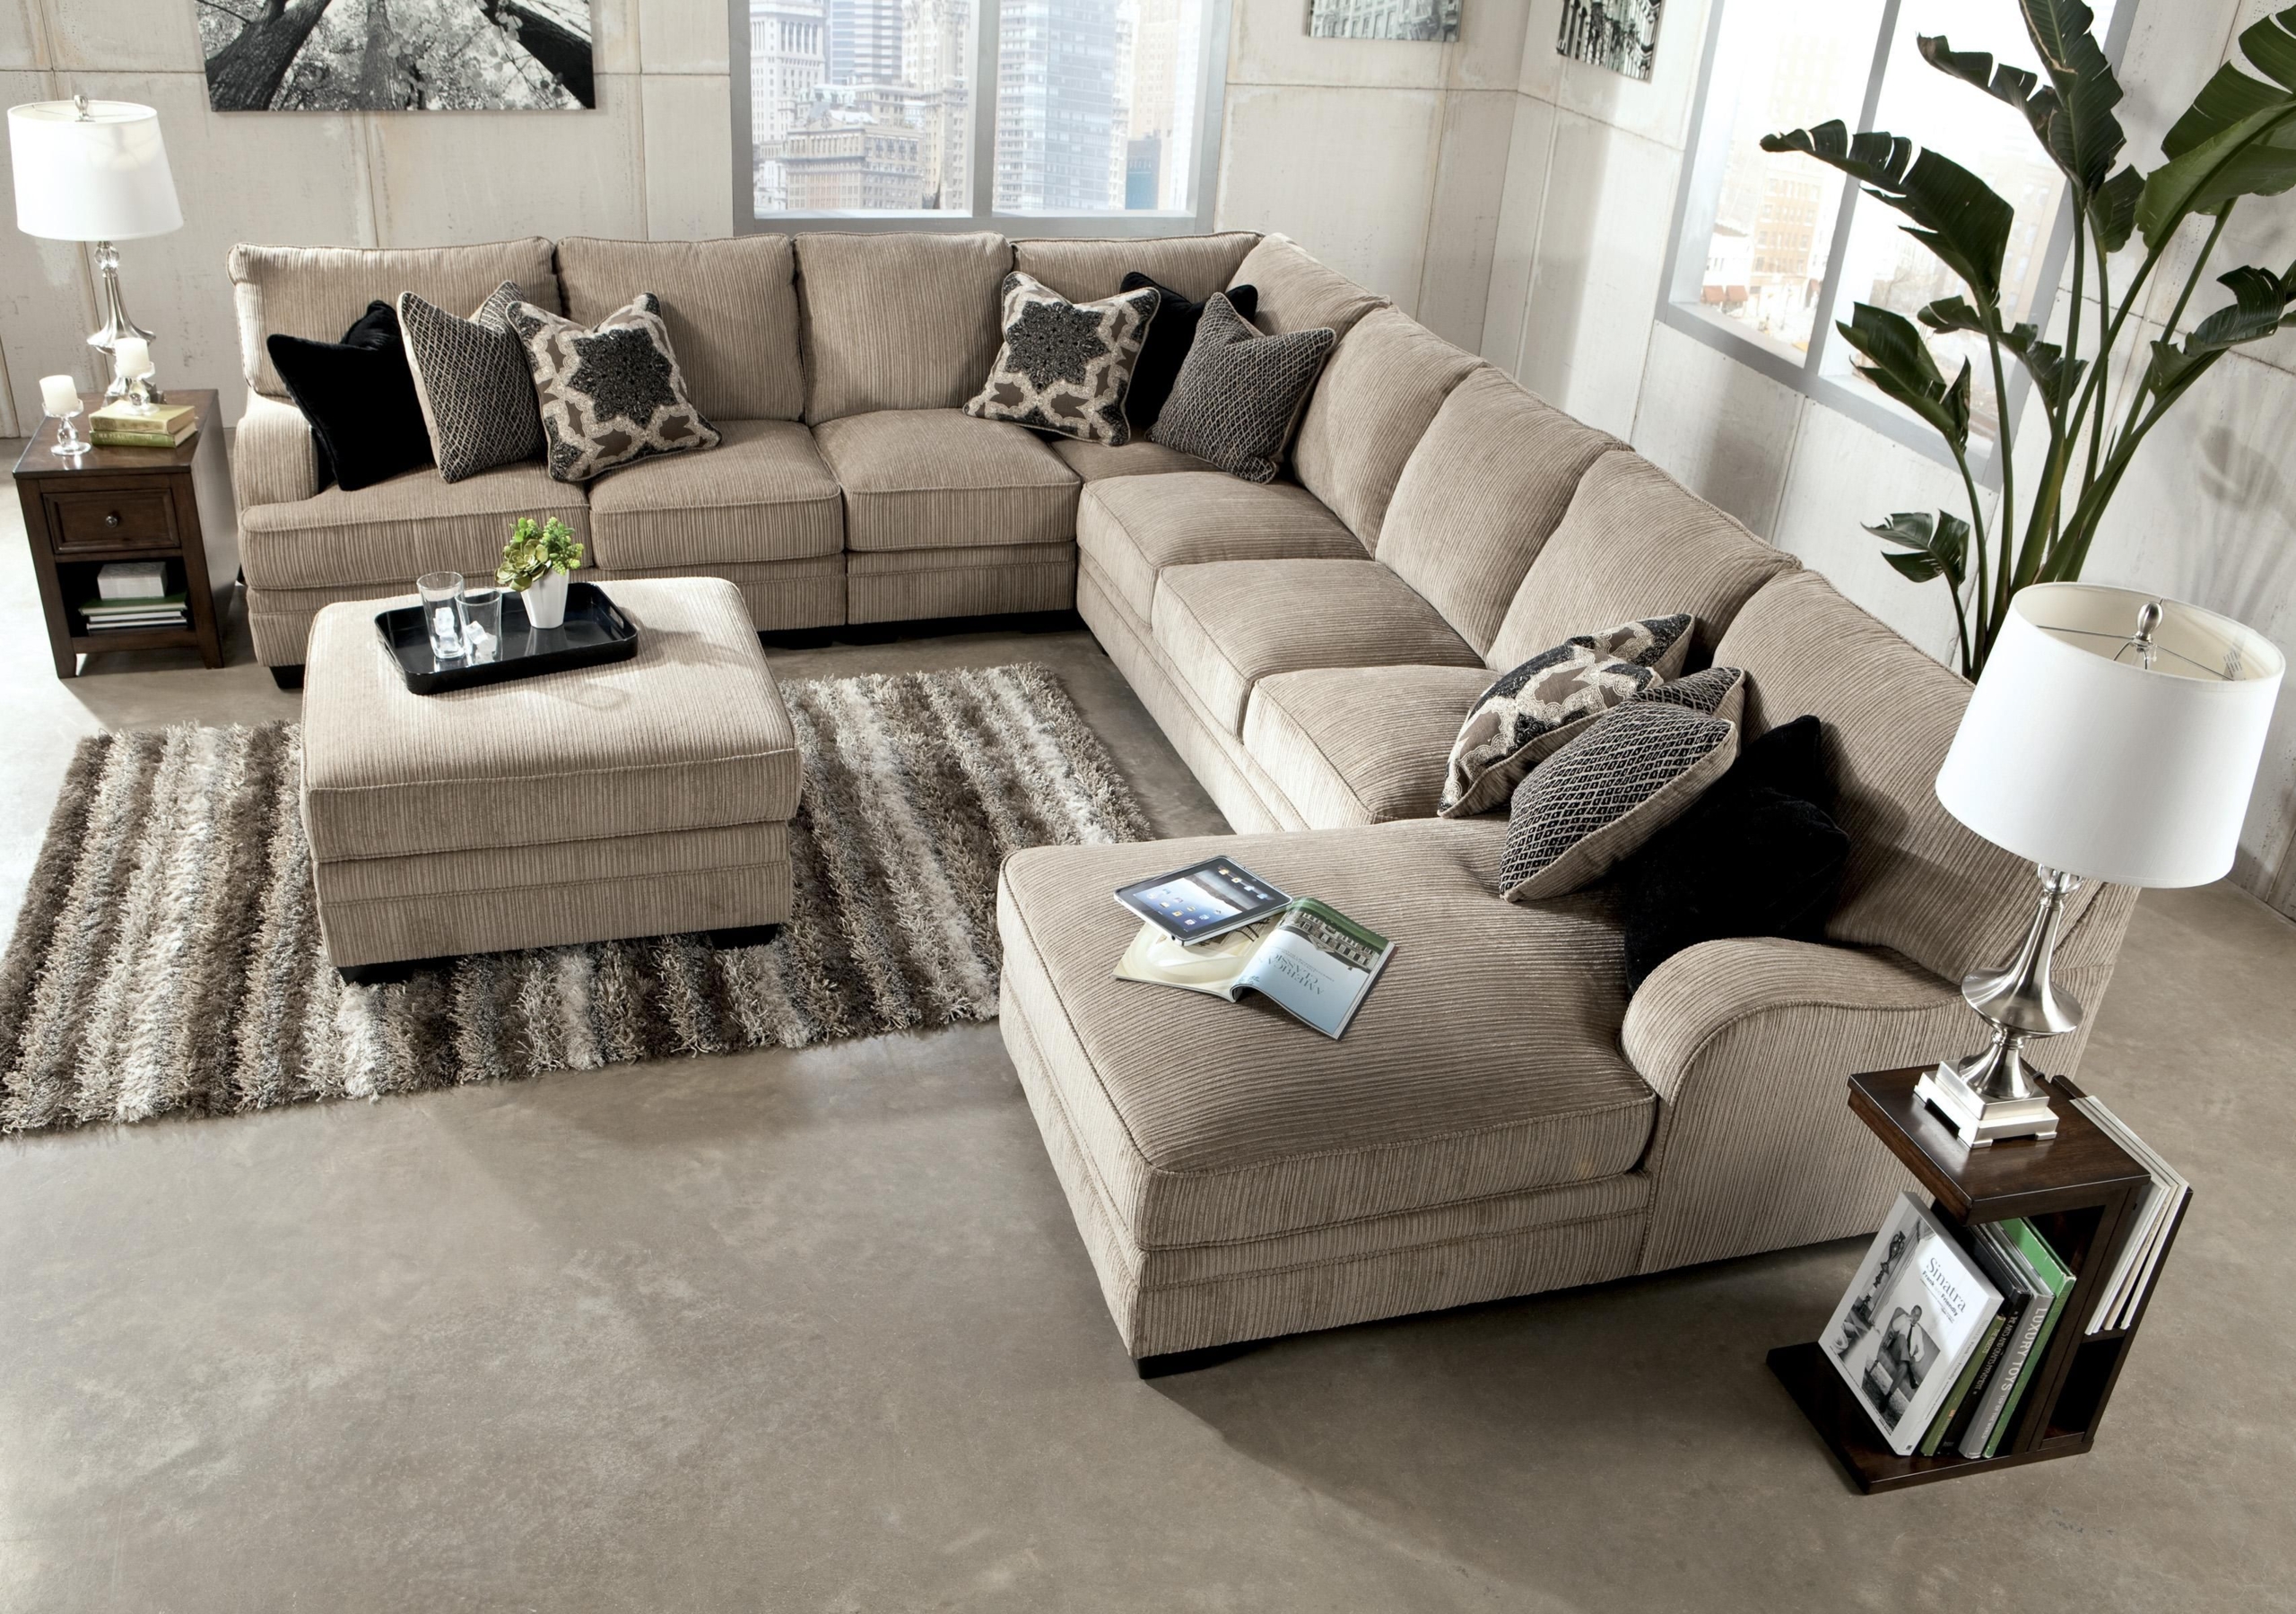 Extra Large Sectional Sofa Visualhunt, Big Sectionals Sofas